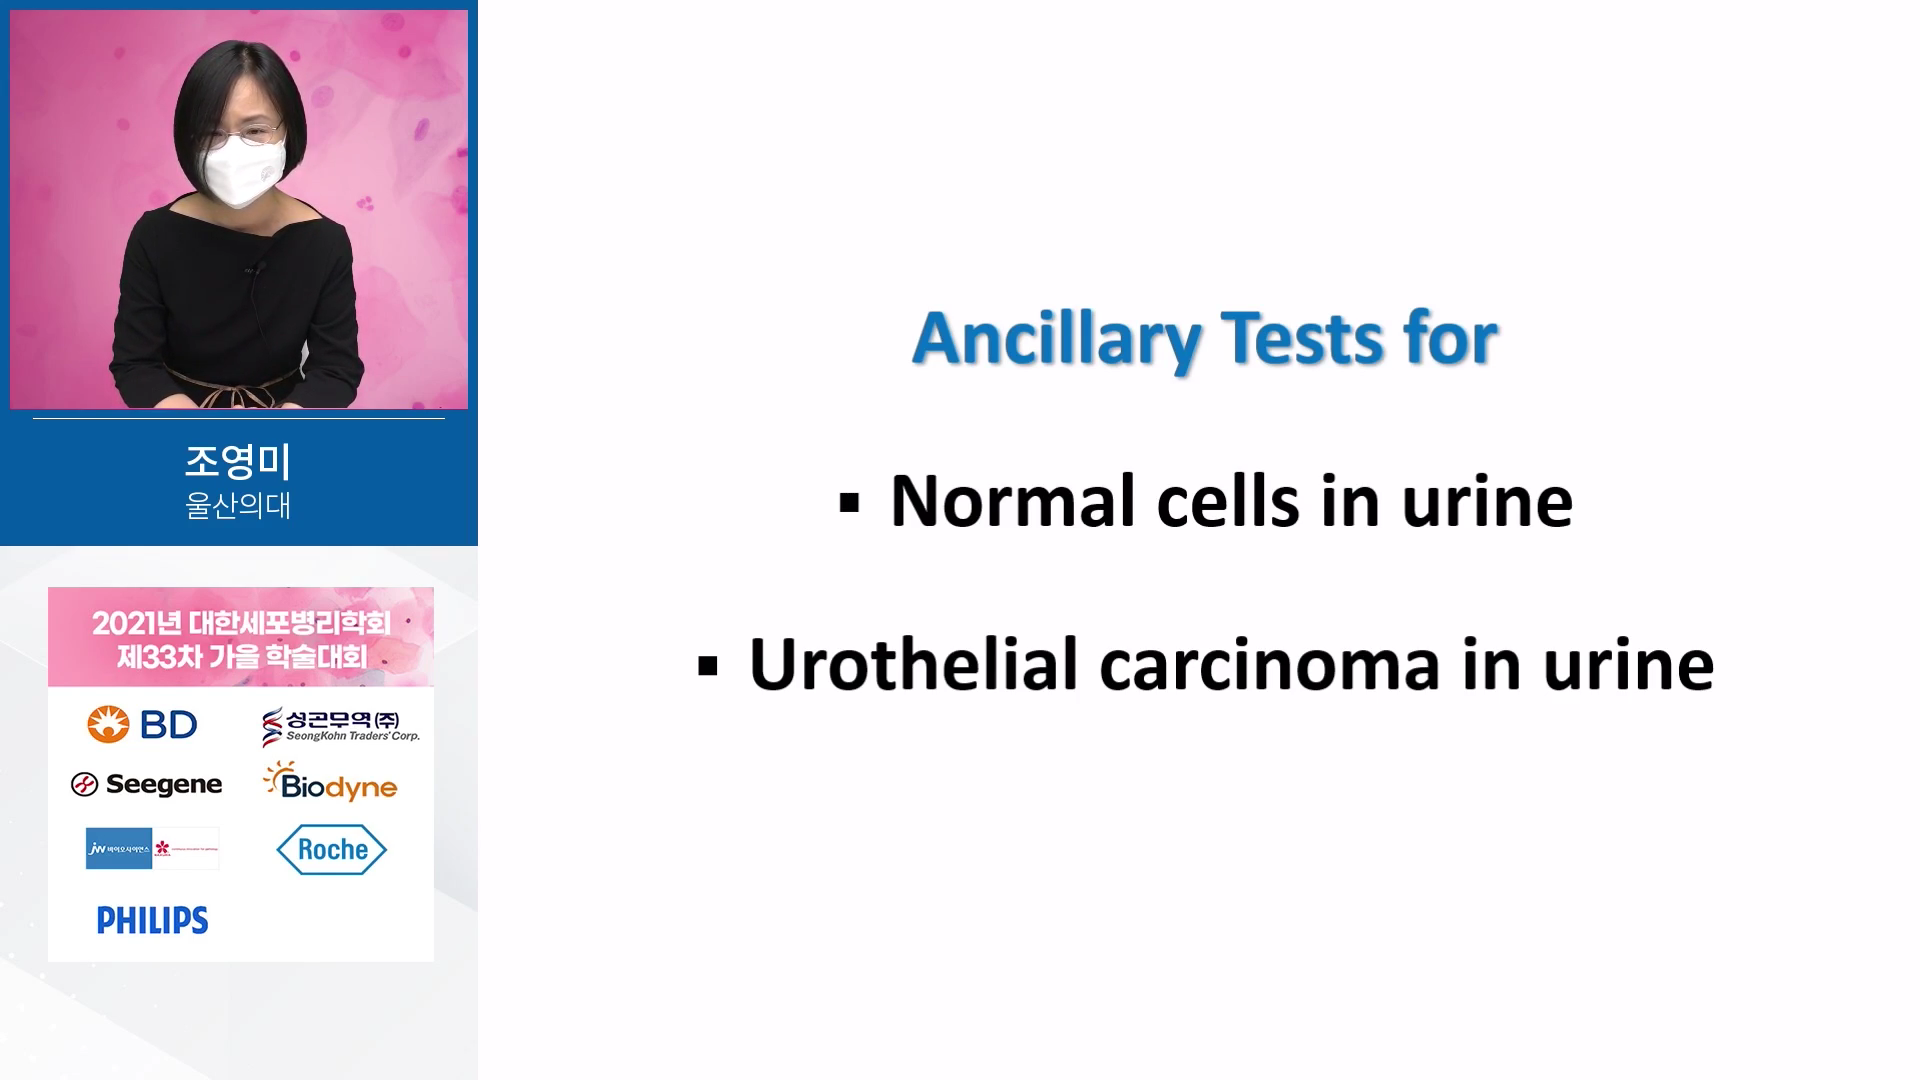 Ancillary Tests for Urine Cytology